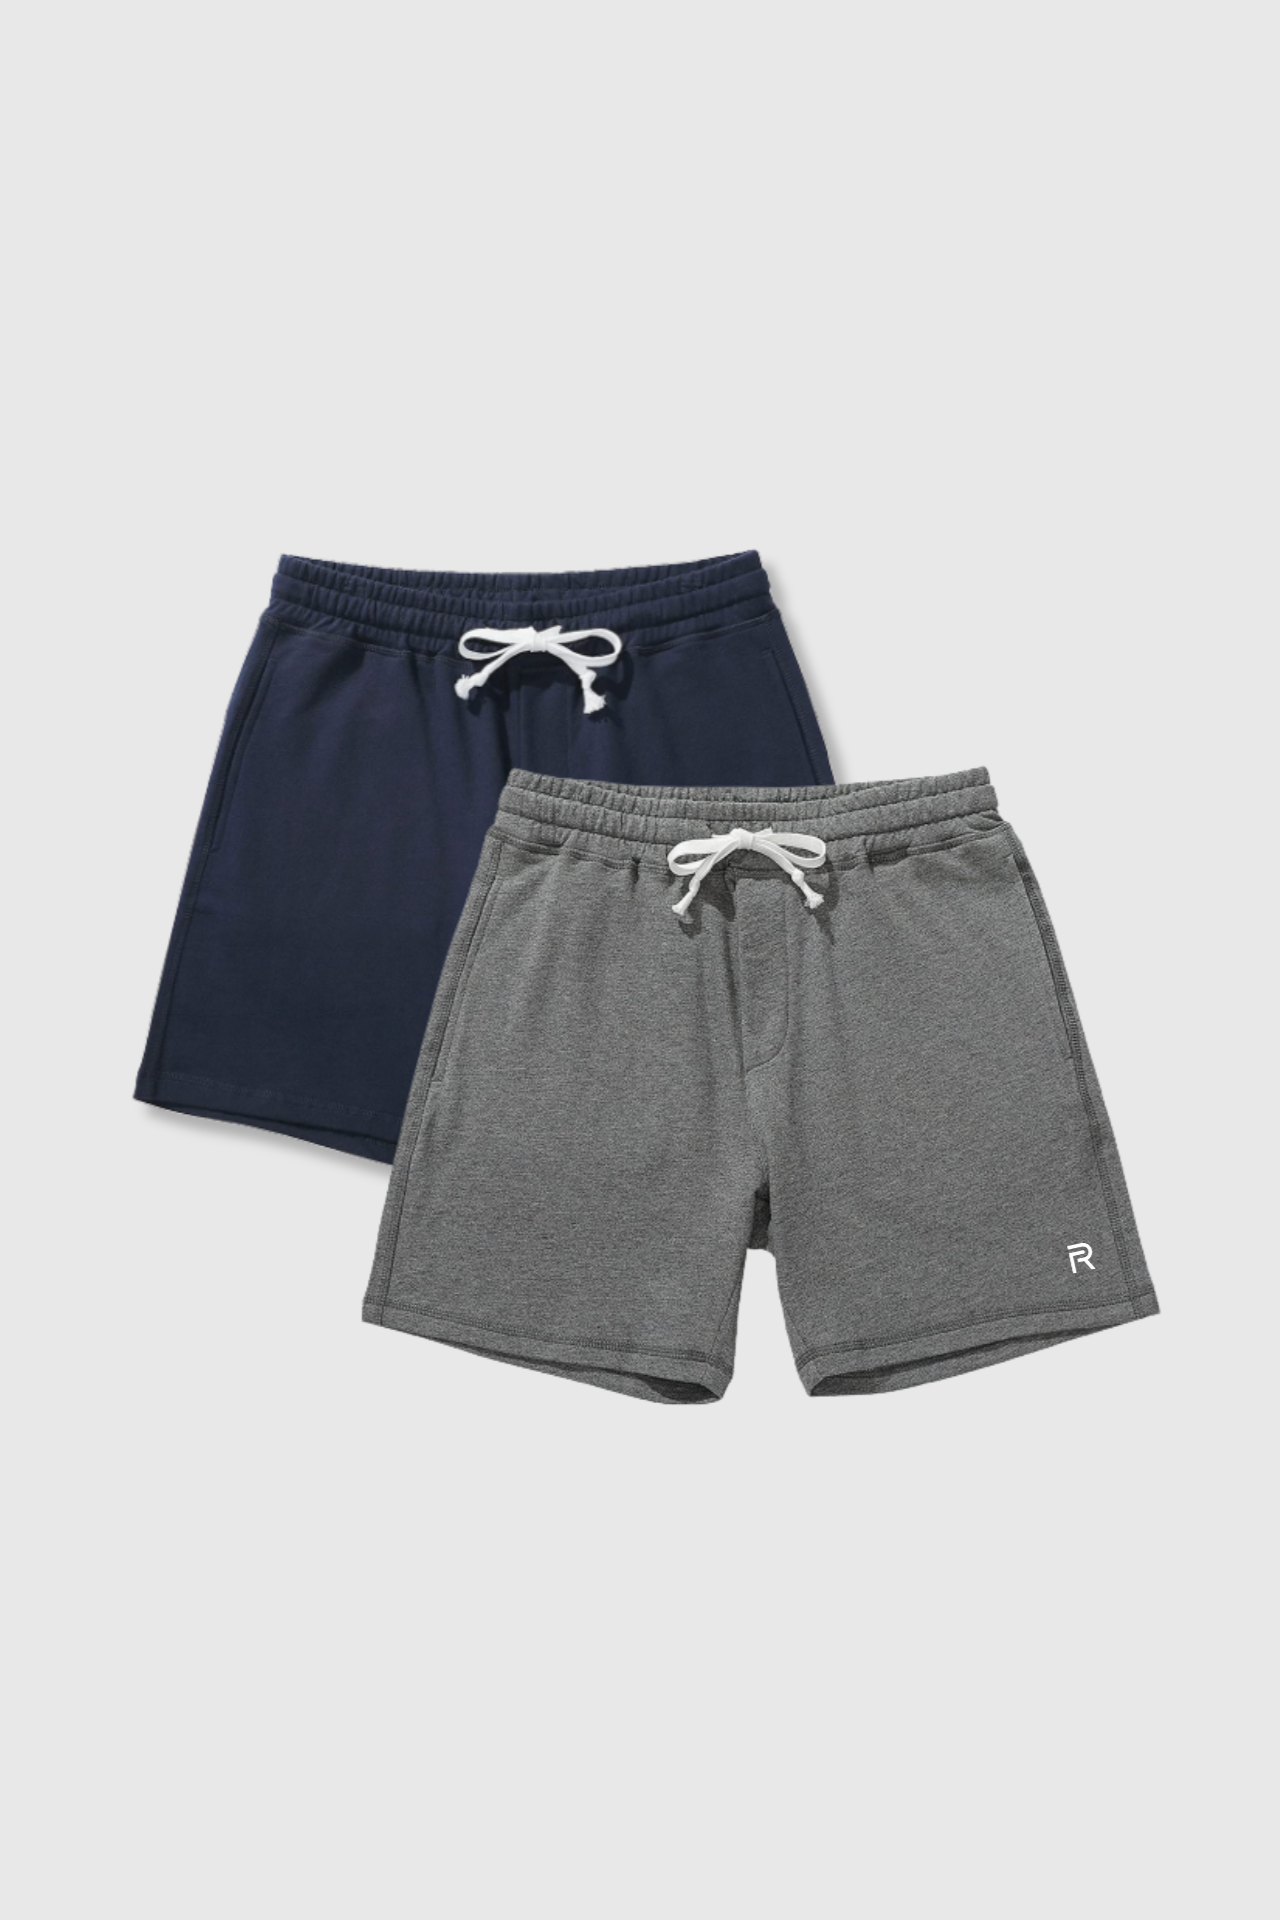 The Vitality 100% Cotton 5.5" Gym Short- 2 Pack Bundle (25% OFF)